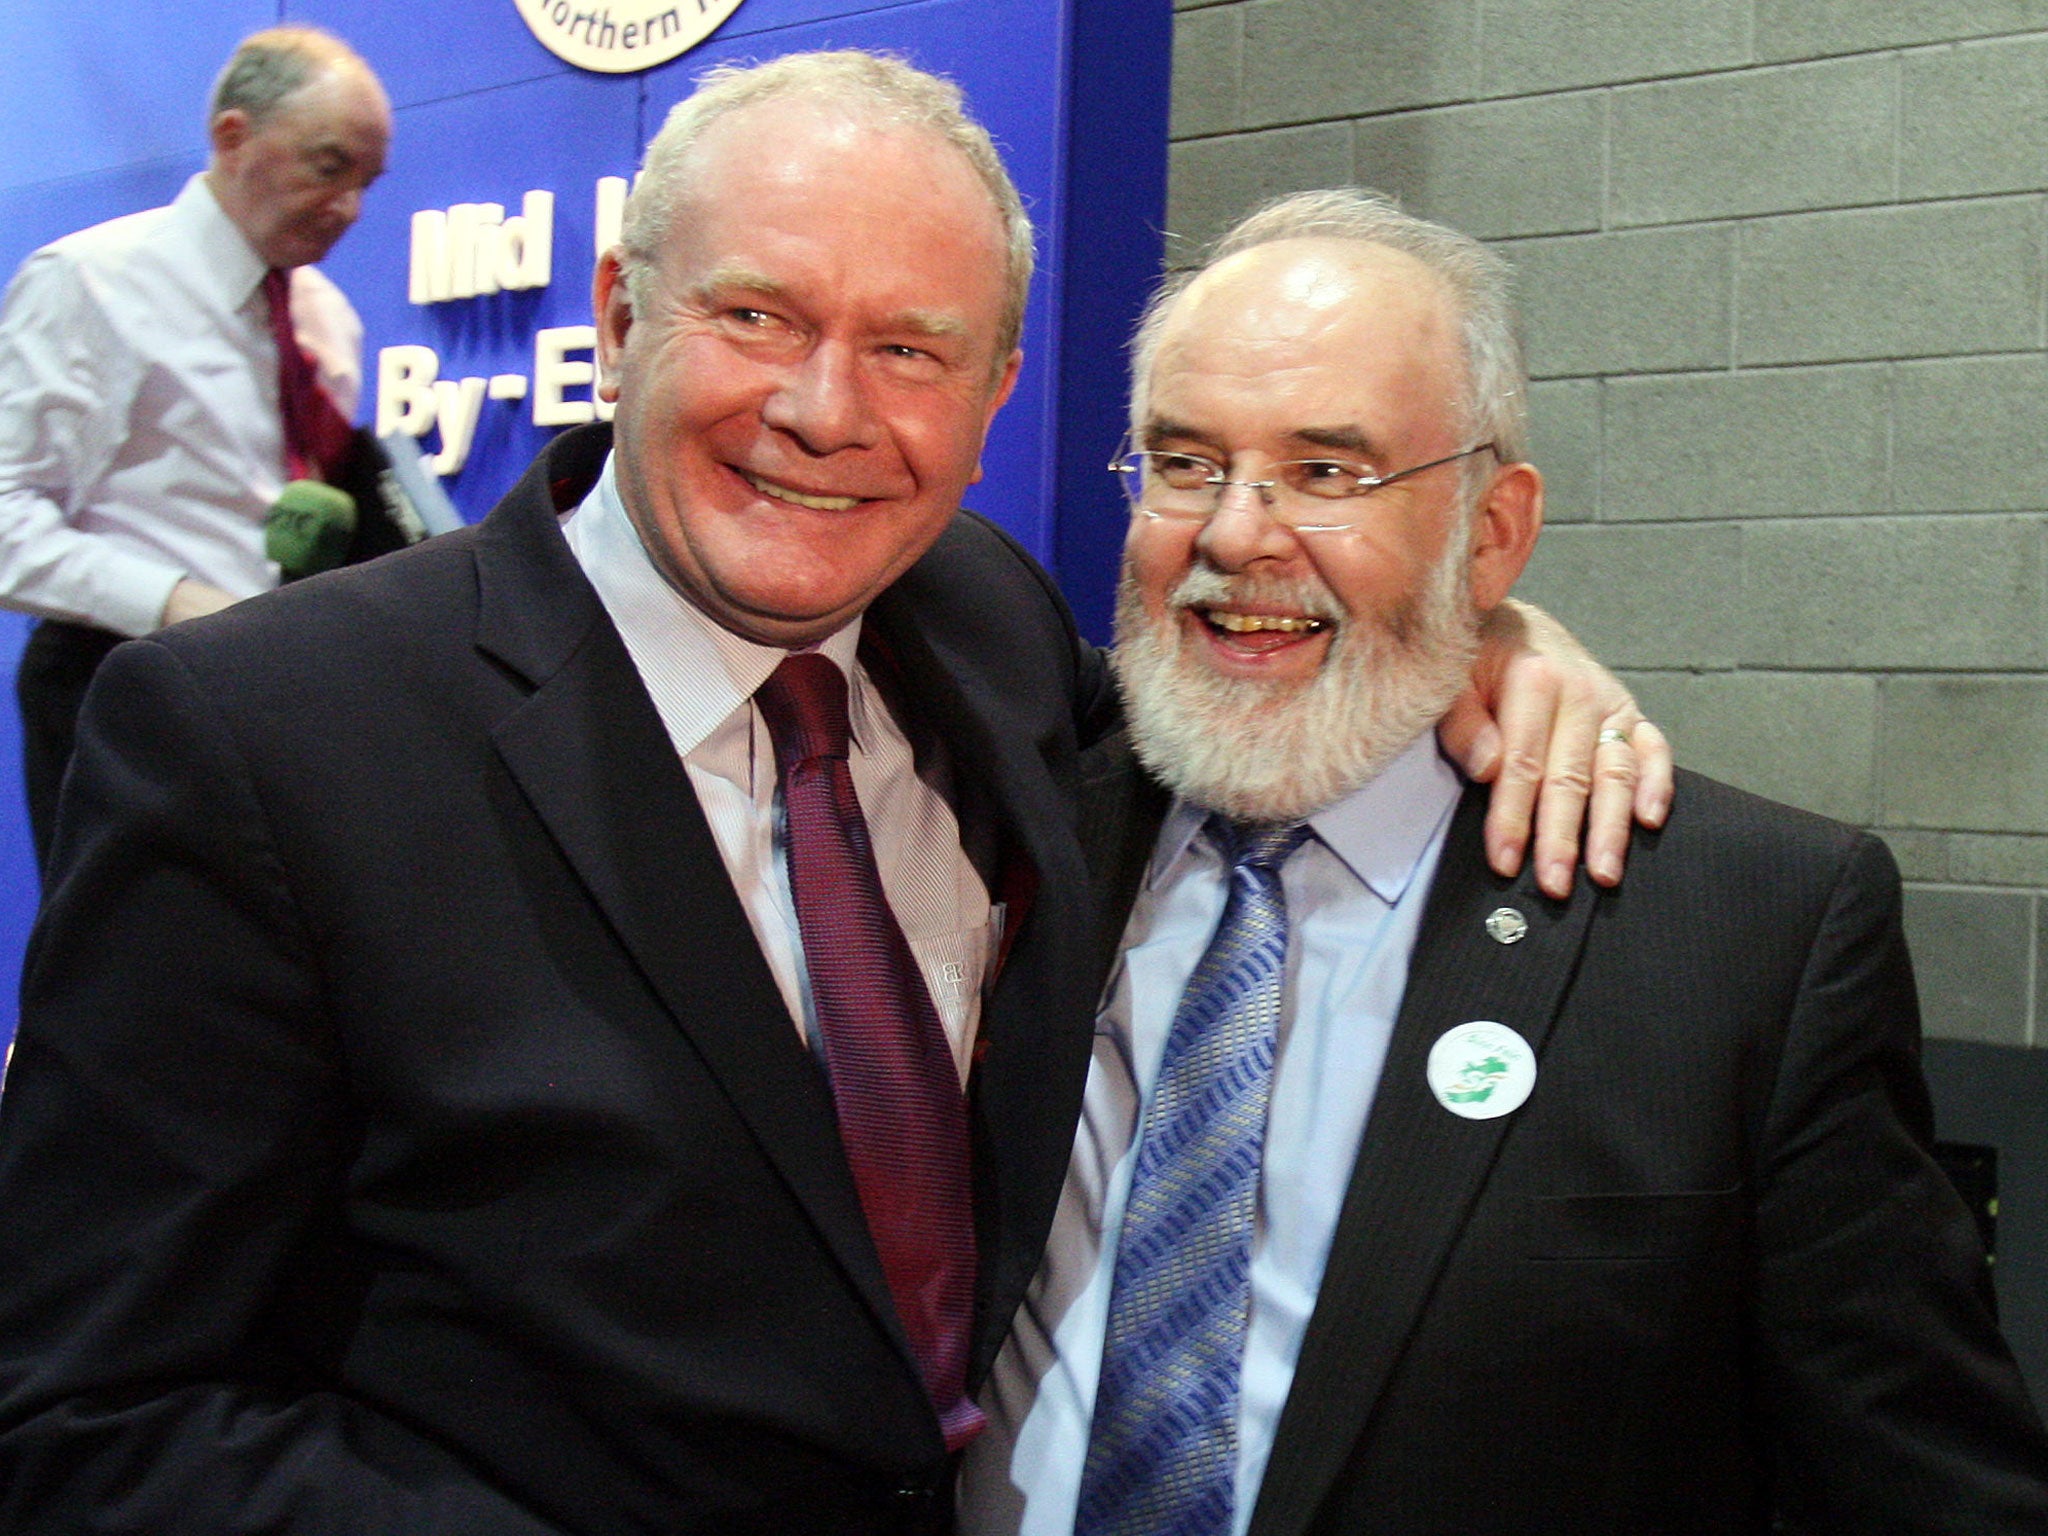 Sinn Fein candidate Francie Molloy (right) is congratulated by outgoing MP, Martin McGuinness